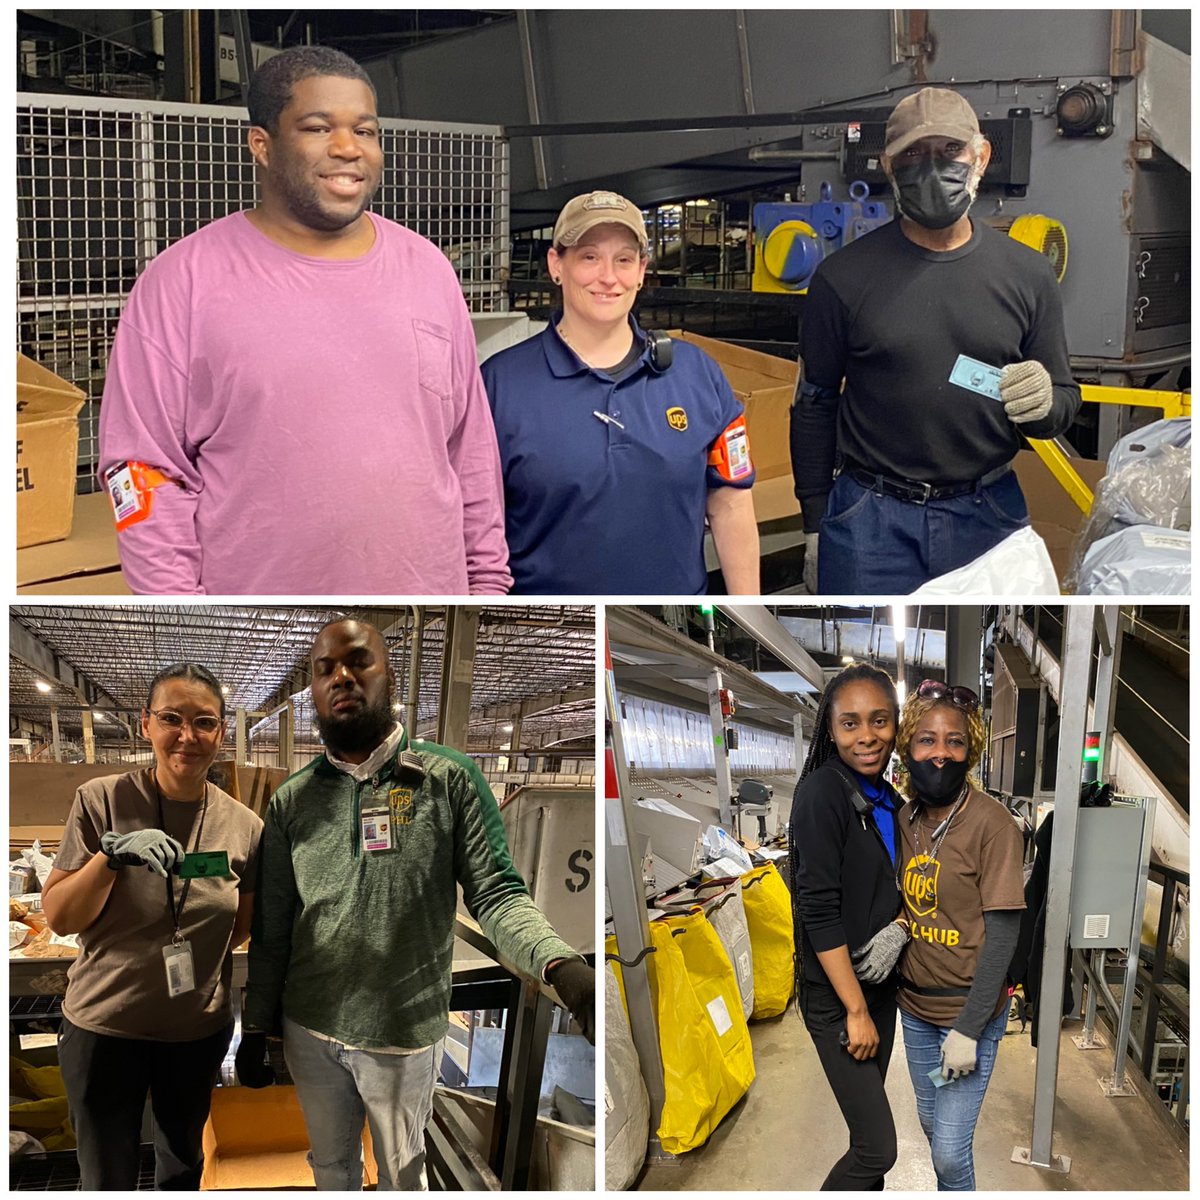 Big ups to @GrimesTyquan on recognizing his employees for going above and beyond making sure their areas are safe from George B. , Aiden B. and Maria B. in small sort debag down to Tanya D. on SLS 2! #safetyfirst #smallsort #recognitionmatters @RayBarczak @RaymondChew95 @BobKee6